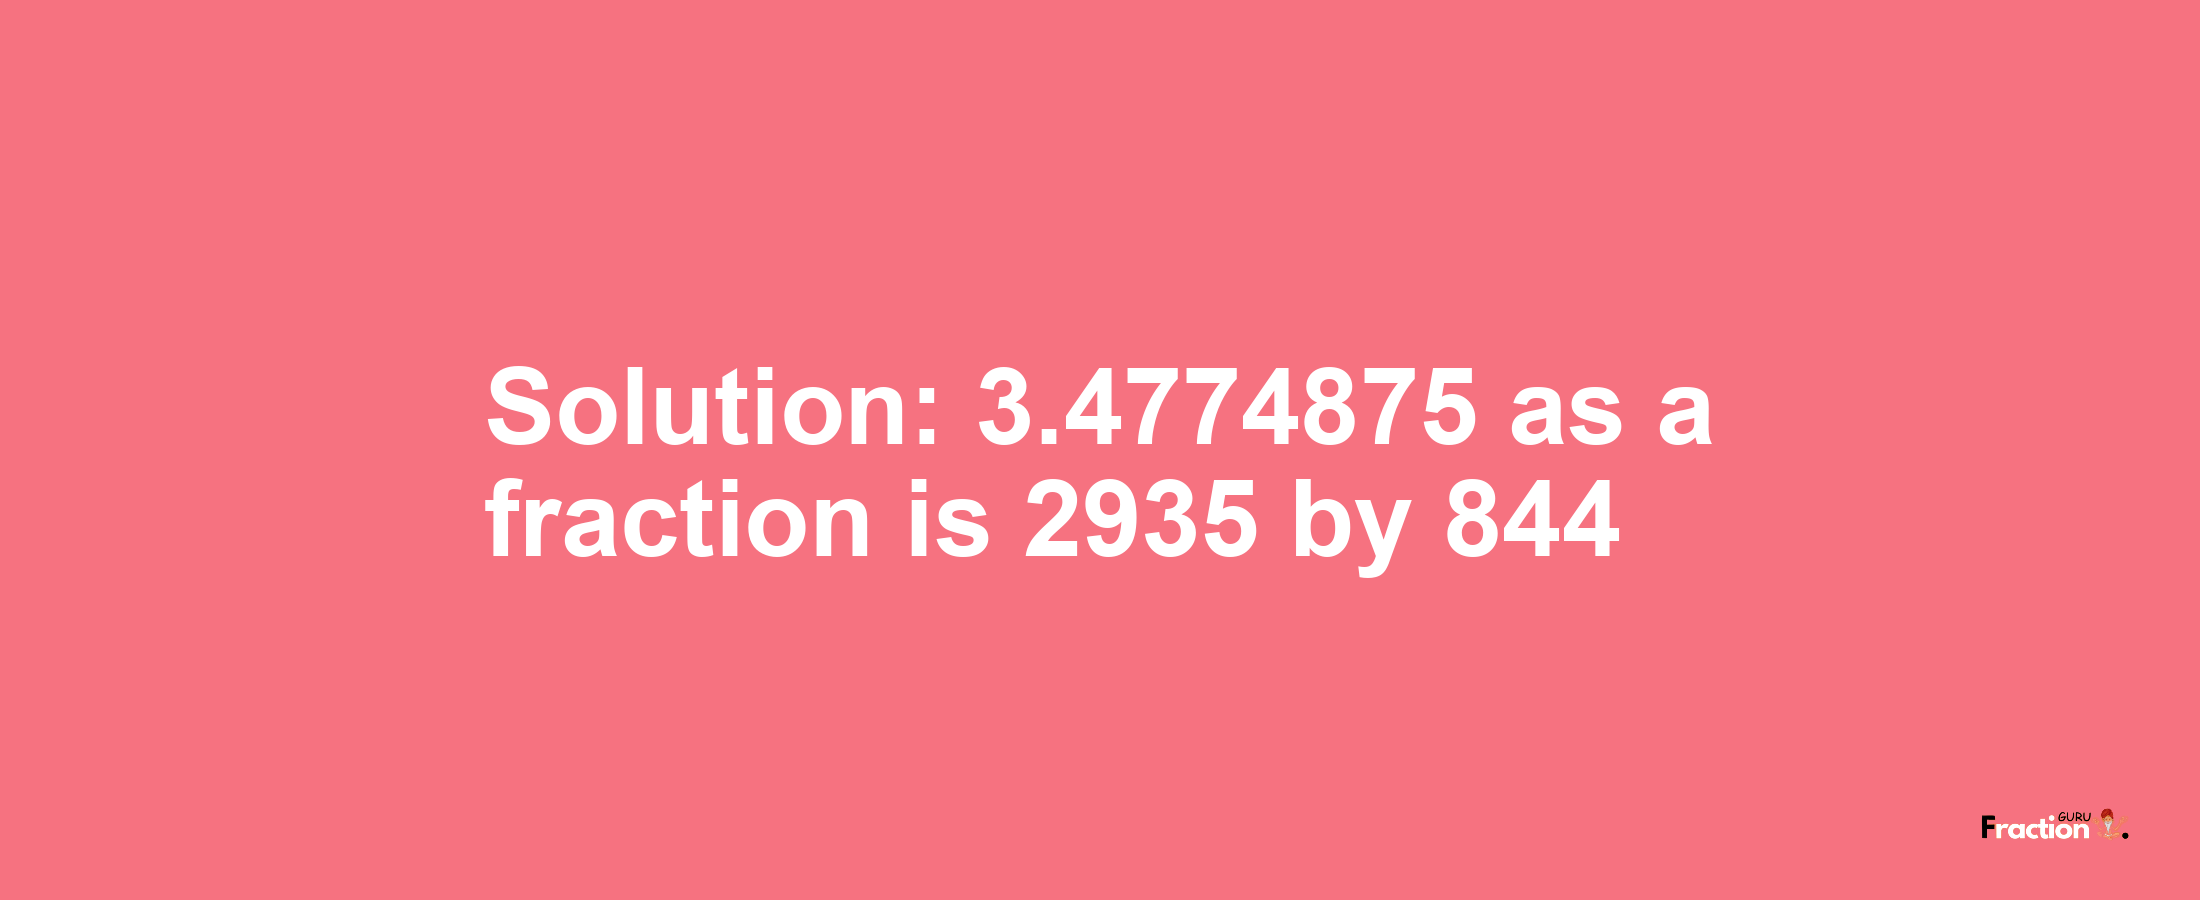 Solution:3.4774875 as a fraction is 2935/844